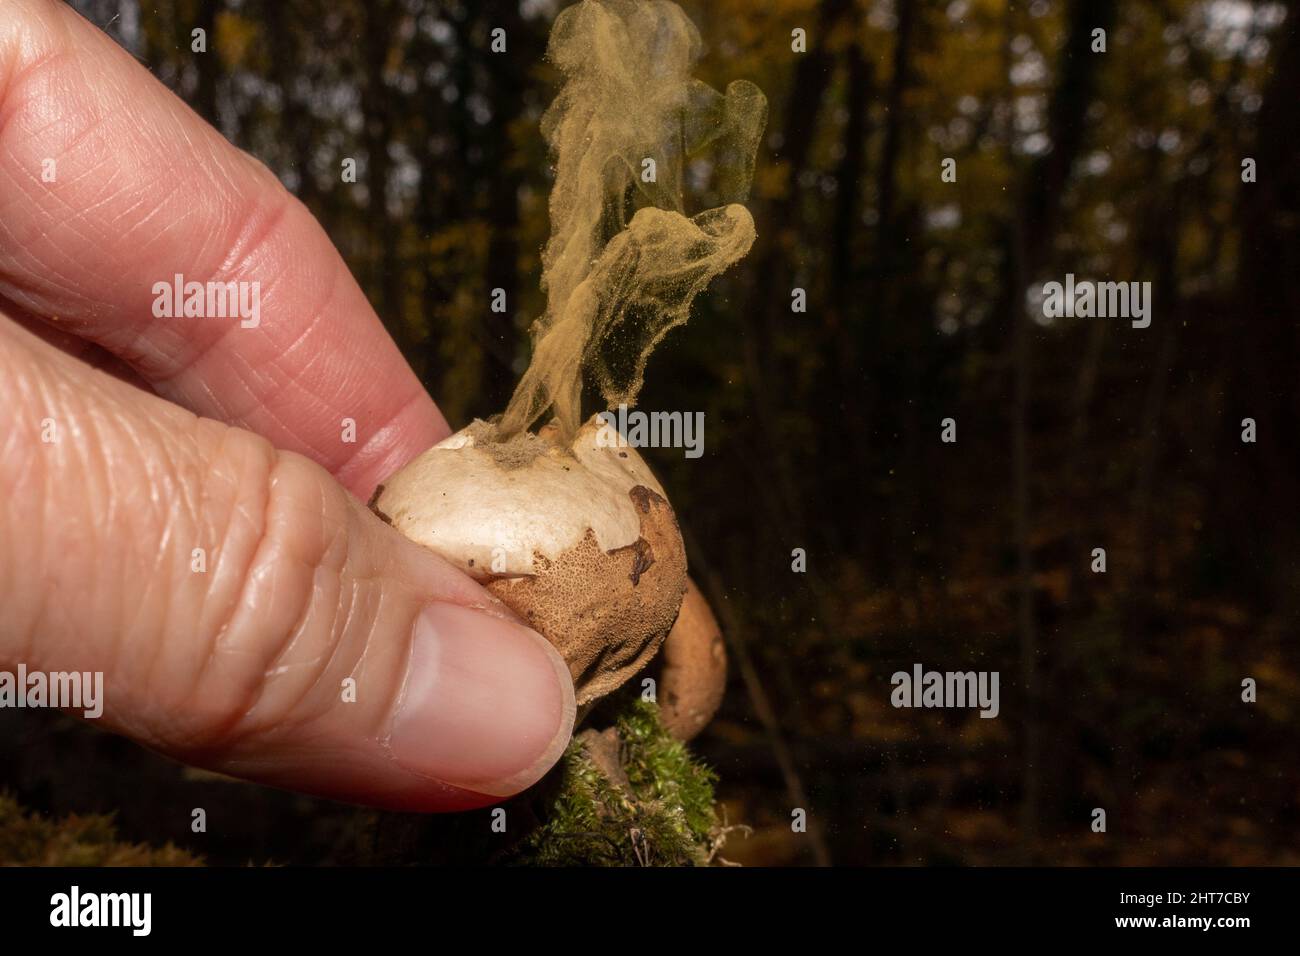 Person squeezing common puffball to release spores (also known as the devil's snuffbox) on a still autumn day in the woods. Stock Photo